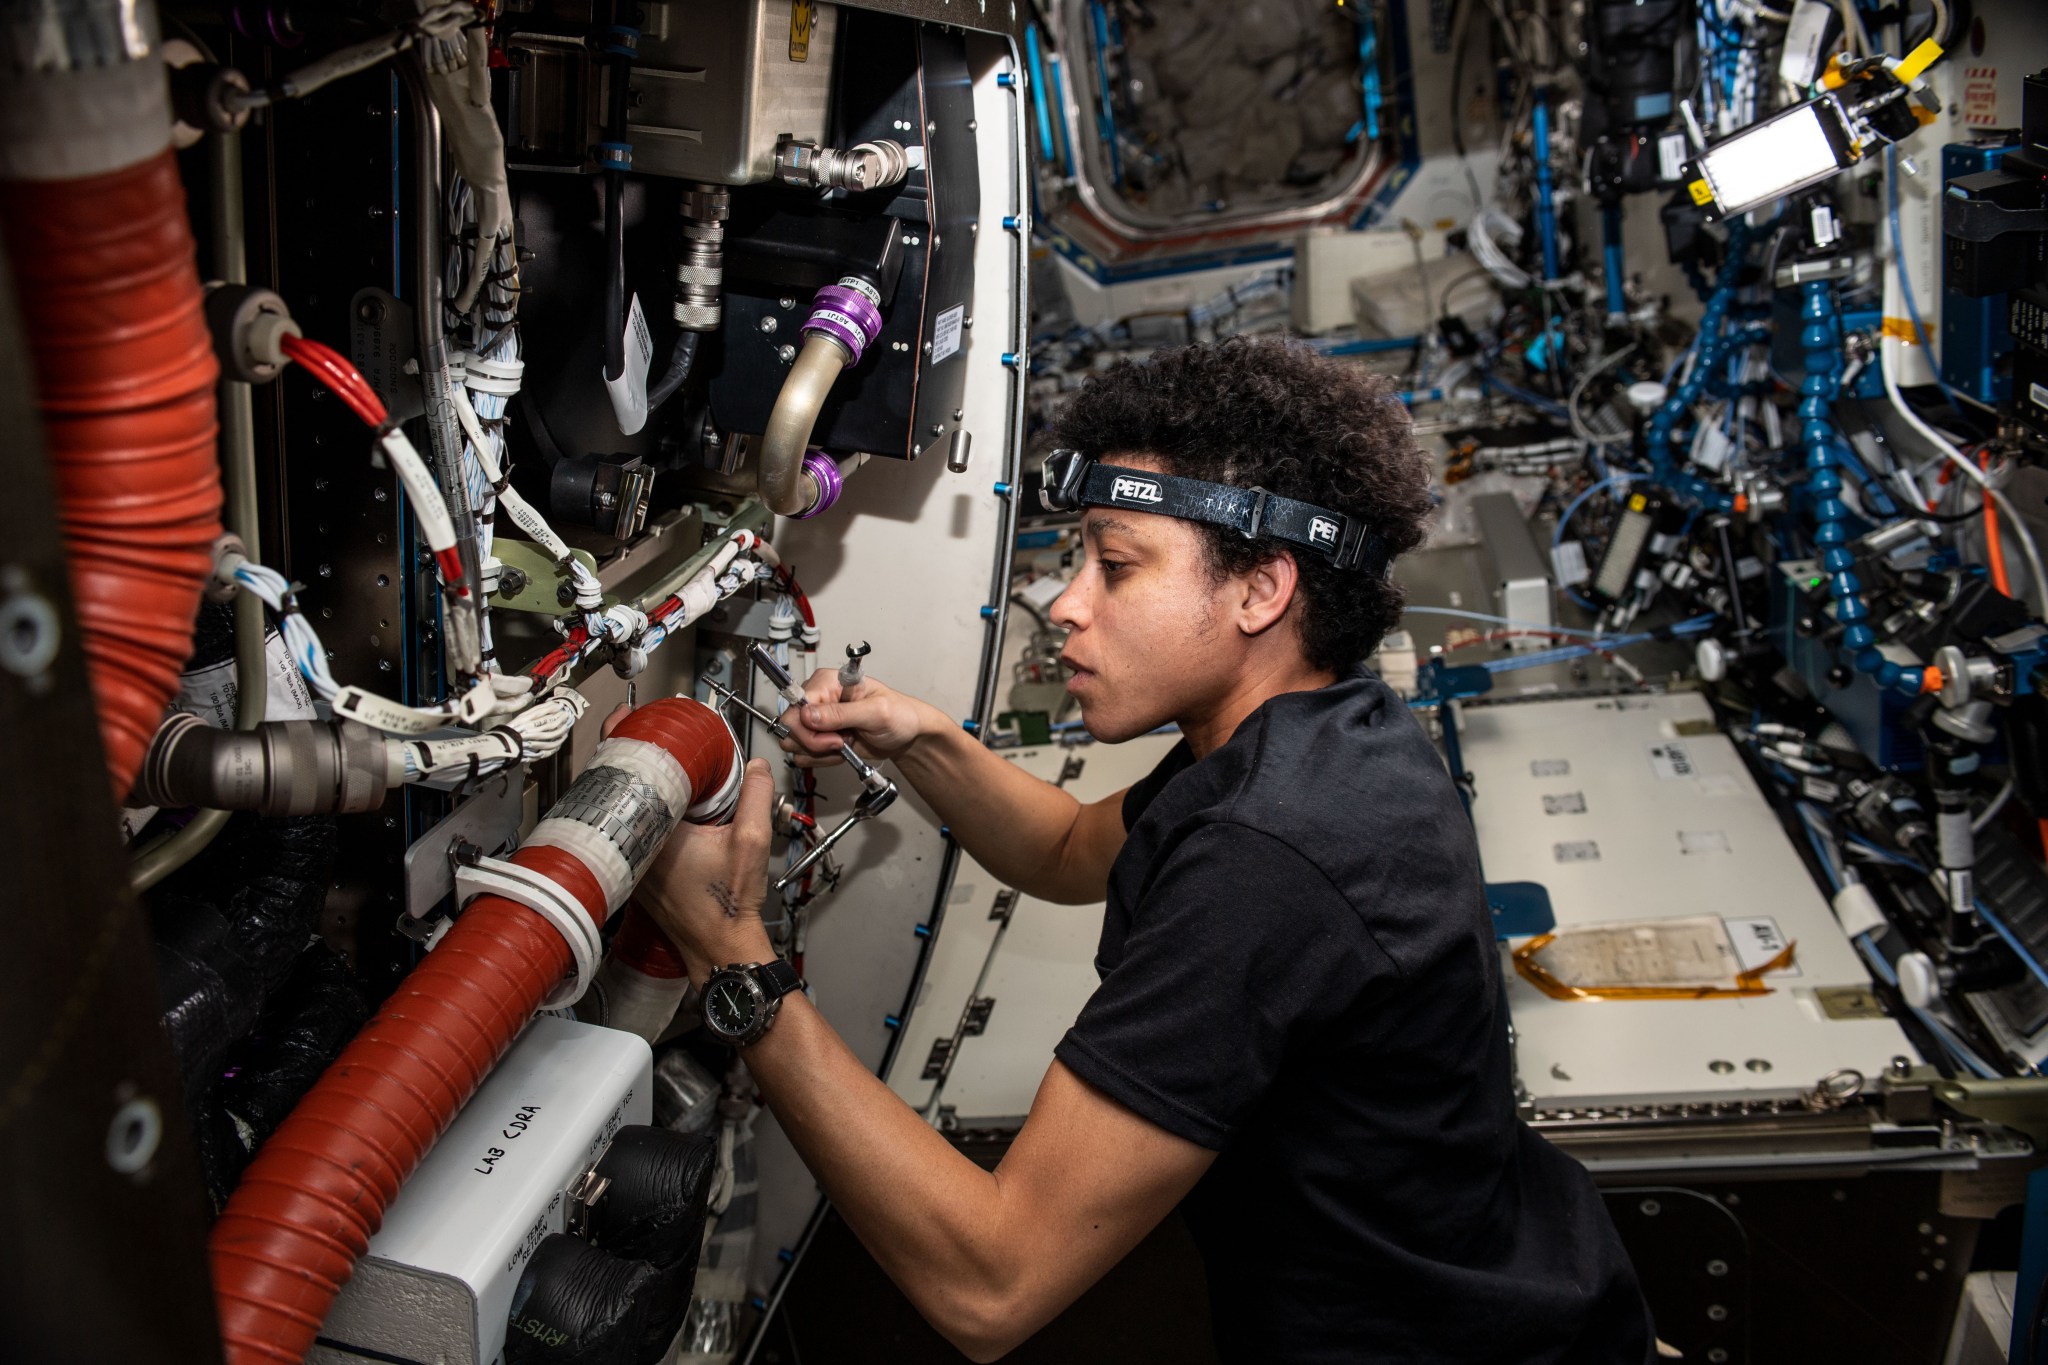 NASA astronaut Jessica Watkins replaces components on the Major Constituents Analyzer, a life support device in the U.S. Destiny laboratory module, that ensures oxygen and carbon dioxide levels remain safe aboard the International Space Station.